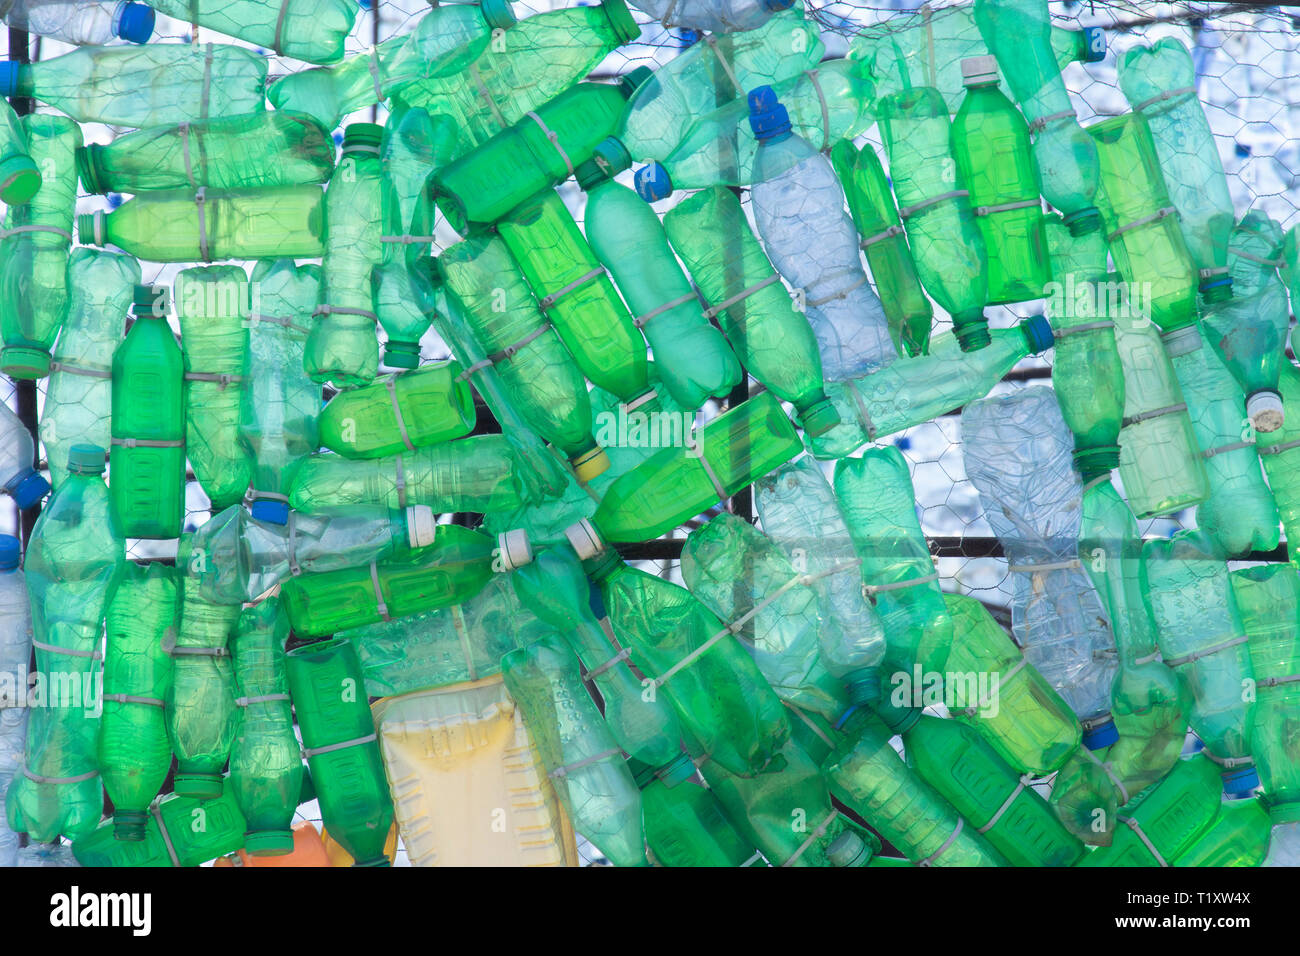 Green waste plastic bottles dumped in nature Stock Photo